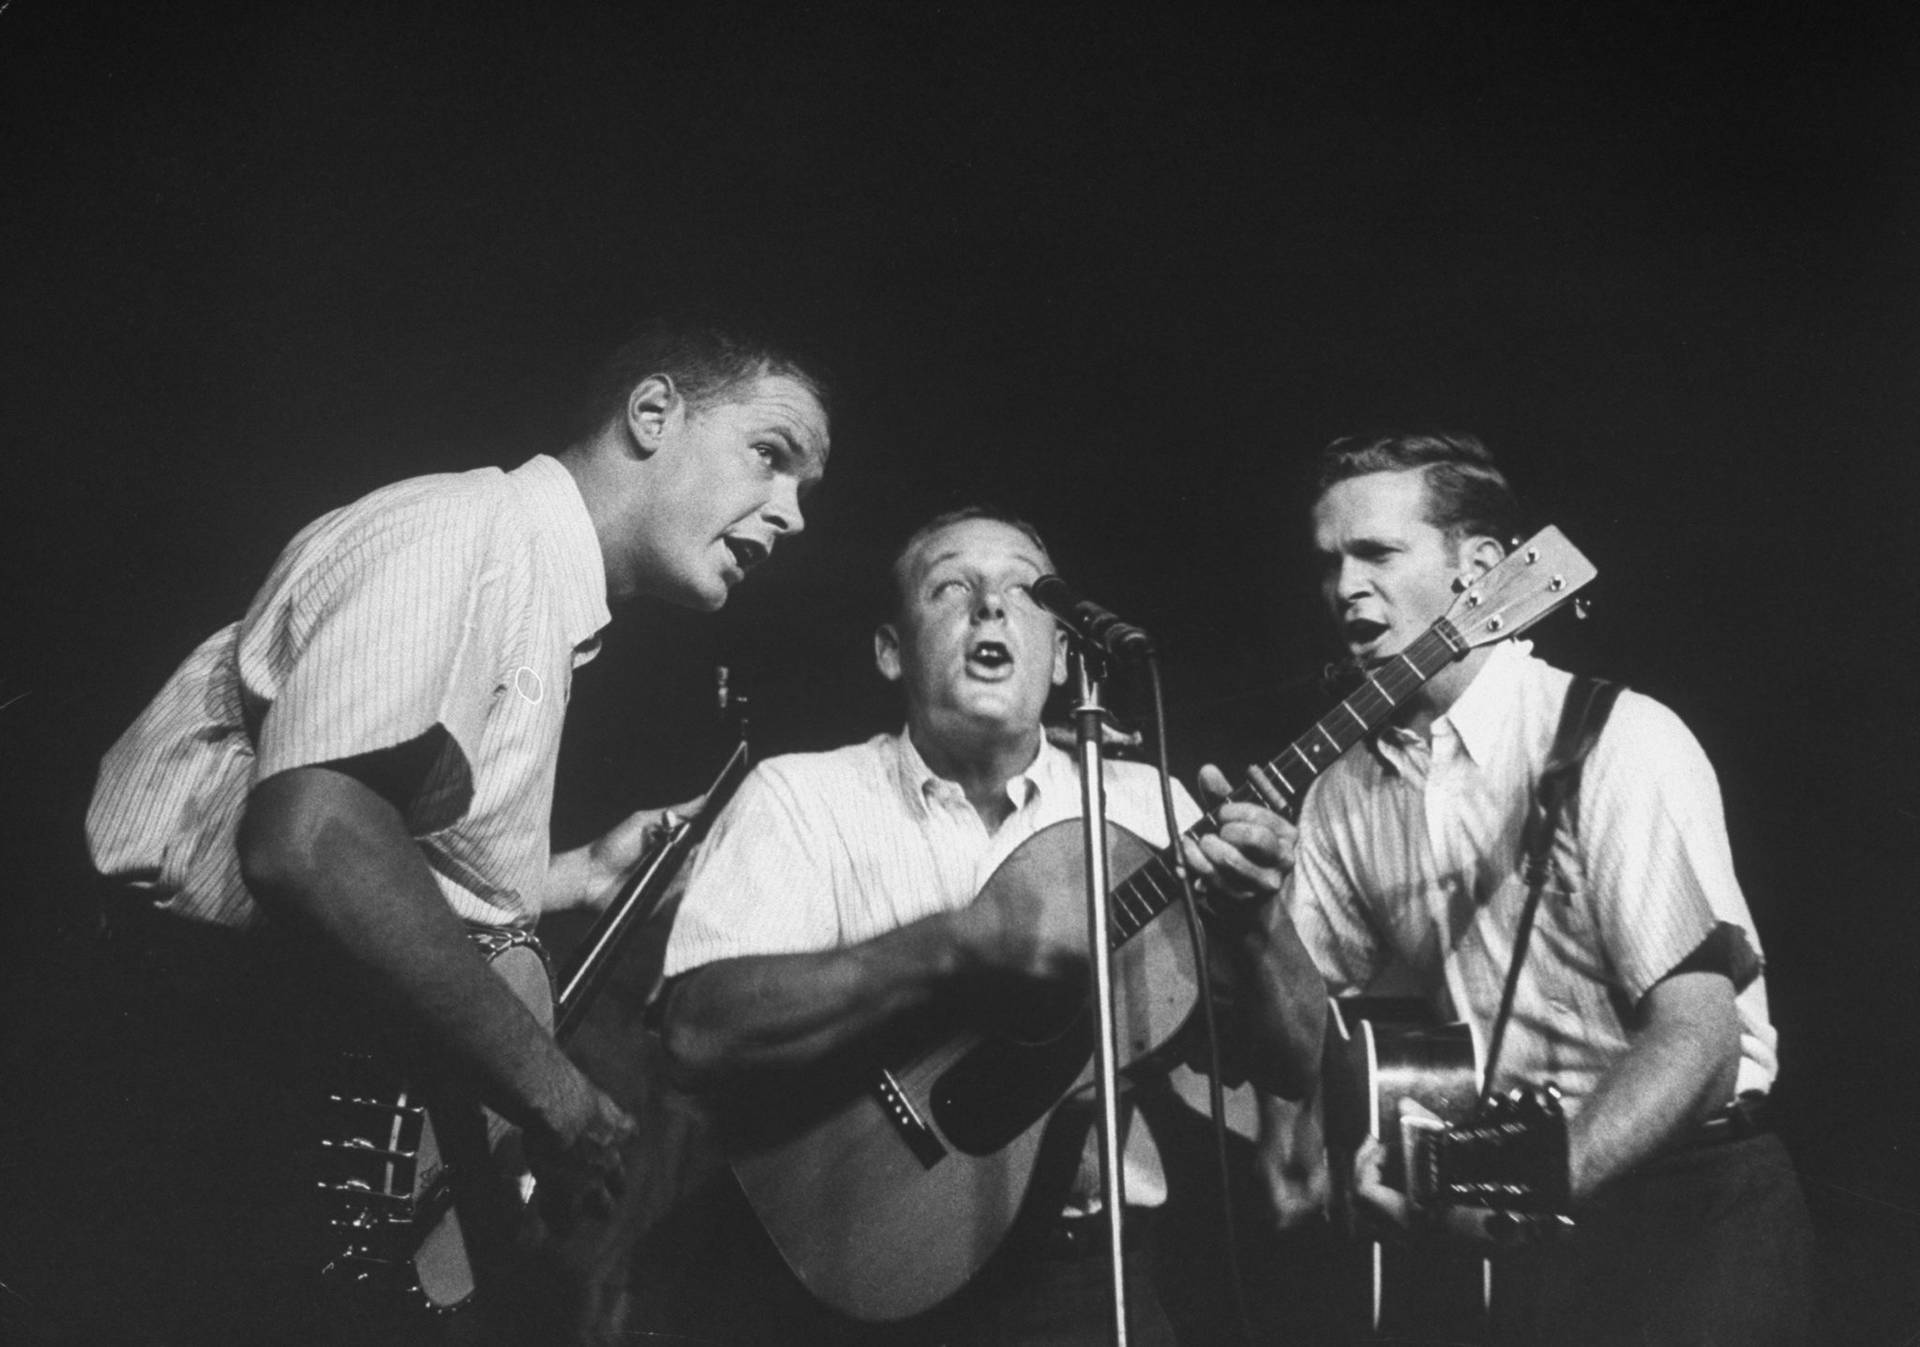 Caption: The Kingston Trio Performing On Stage in the 1970s Wallpaper